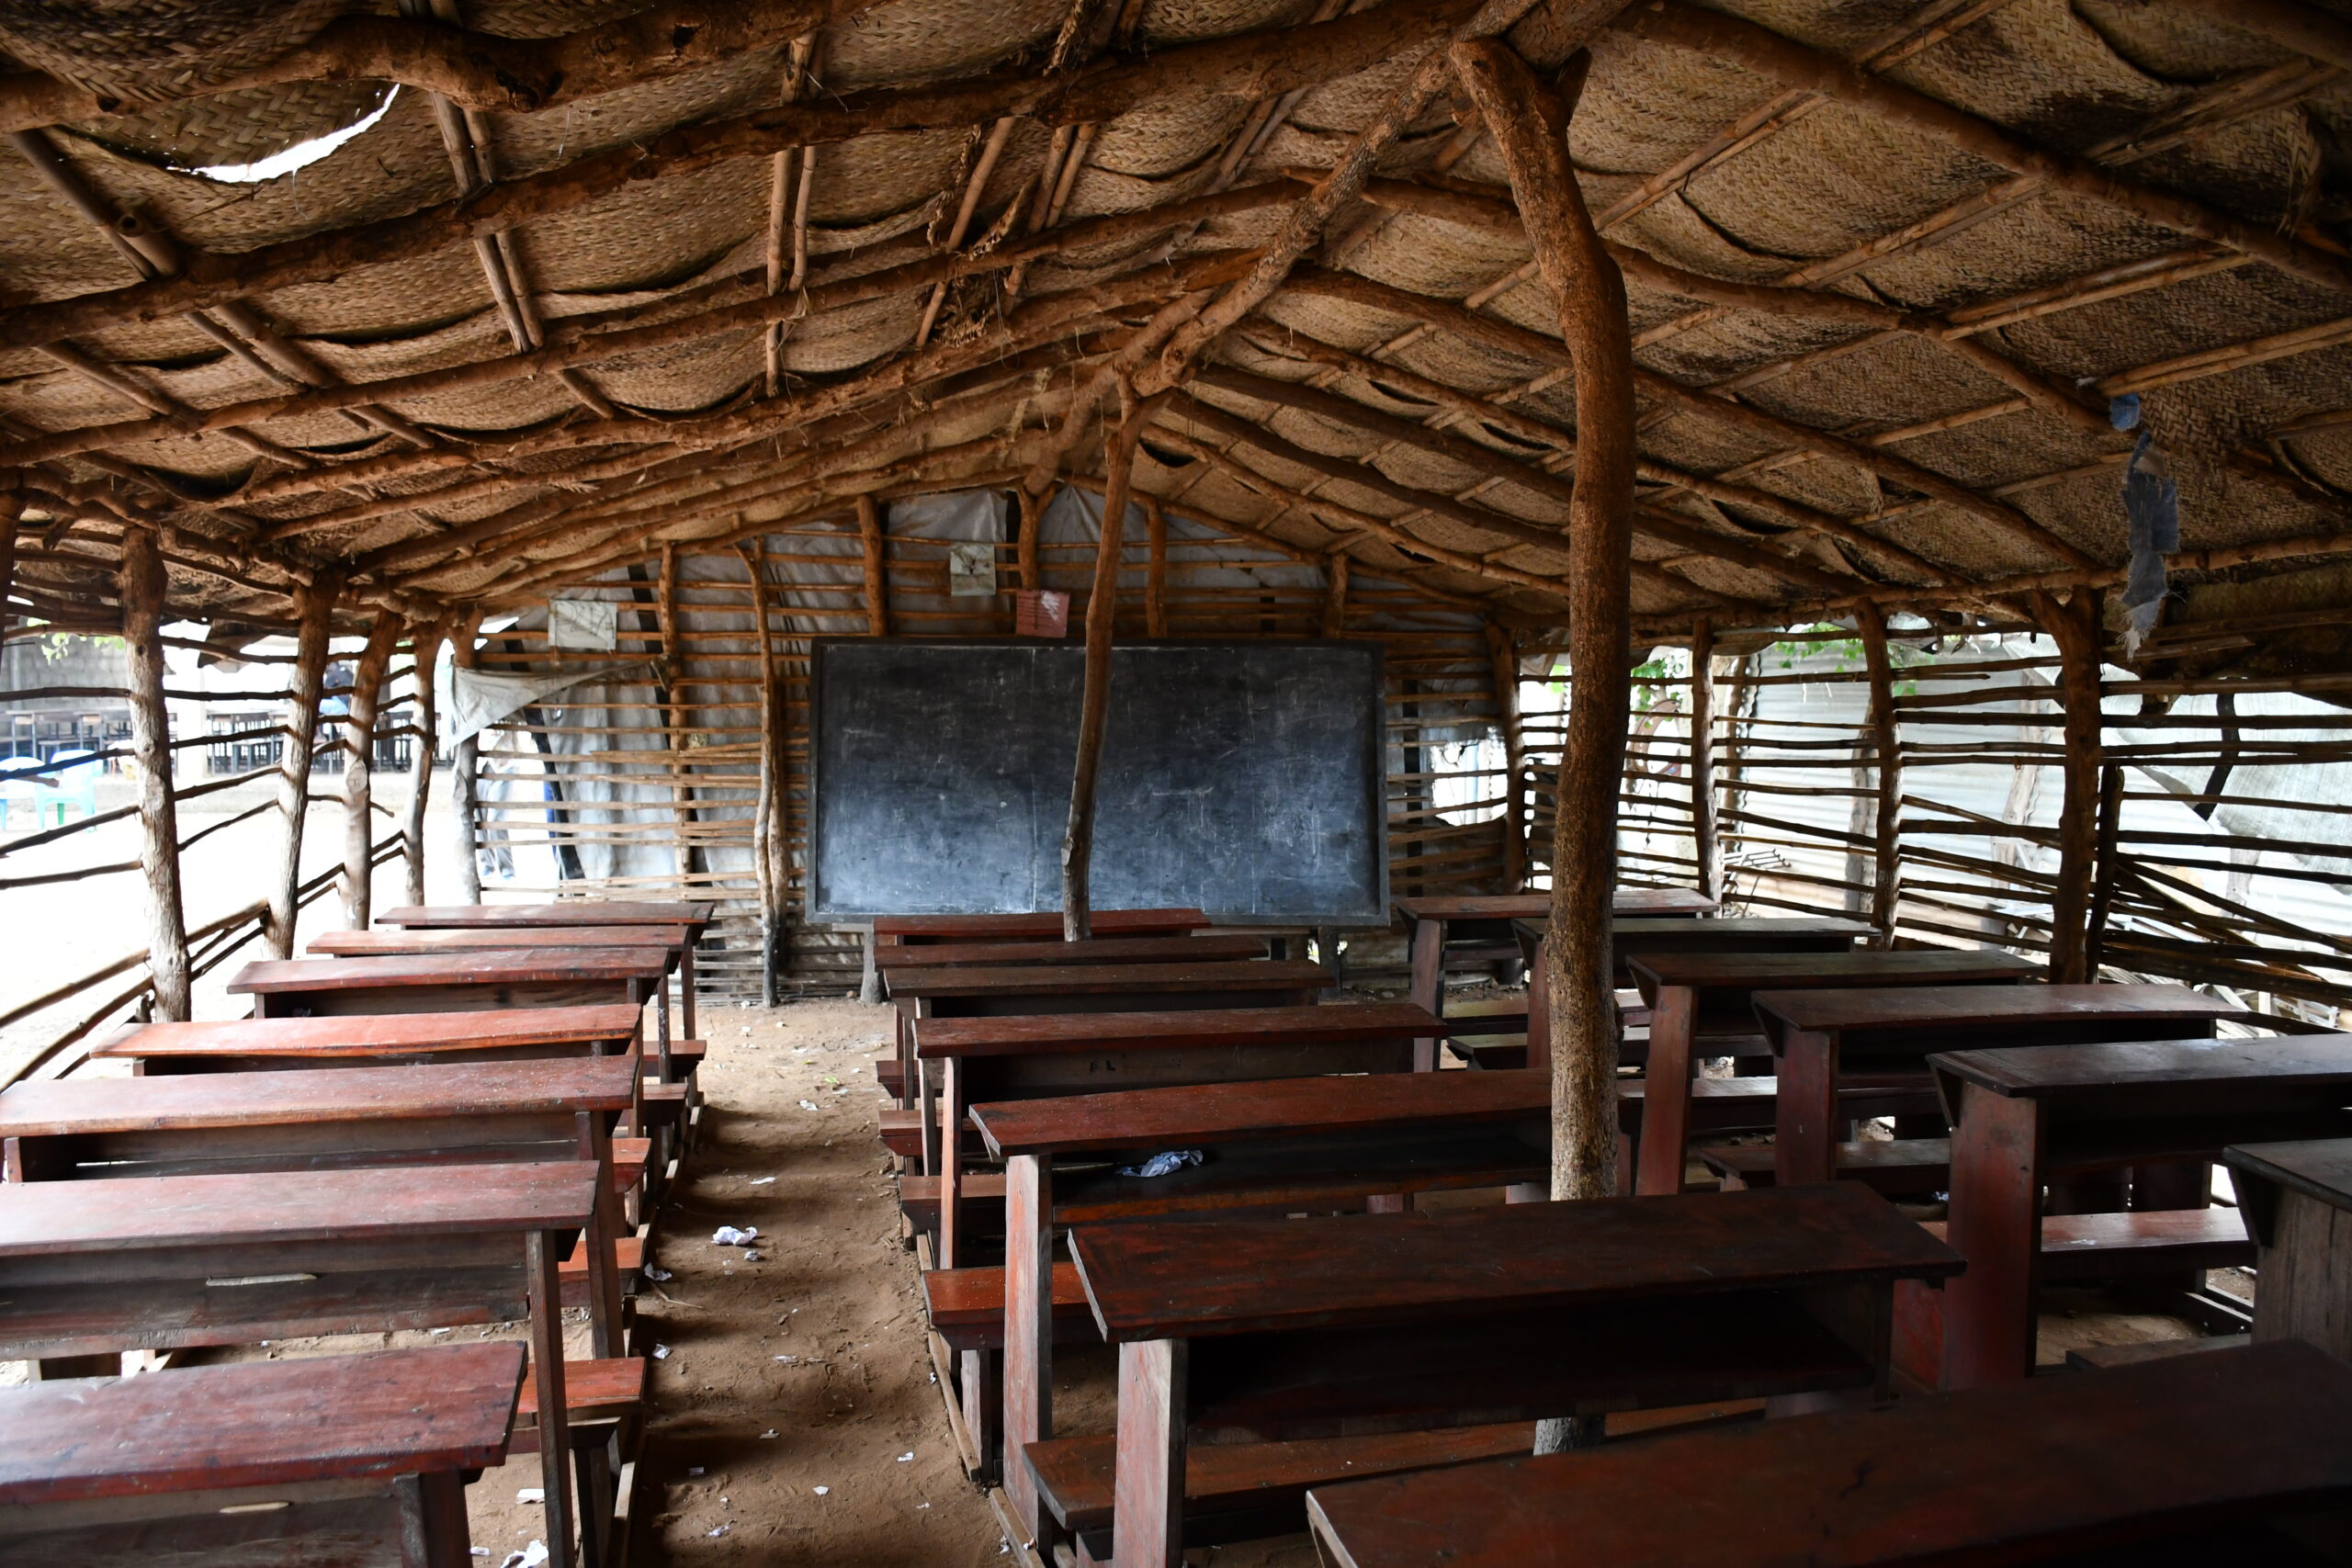 classroom hun made from sticks and sheeted coverings with wooden desks, sand floor. A blackboard stands at the front of the room.